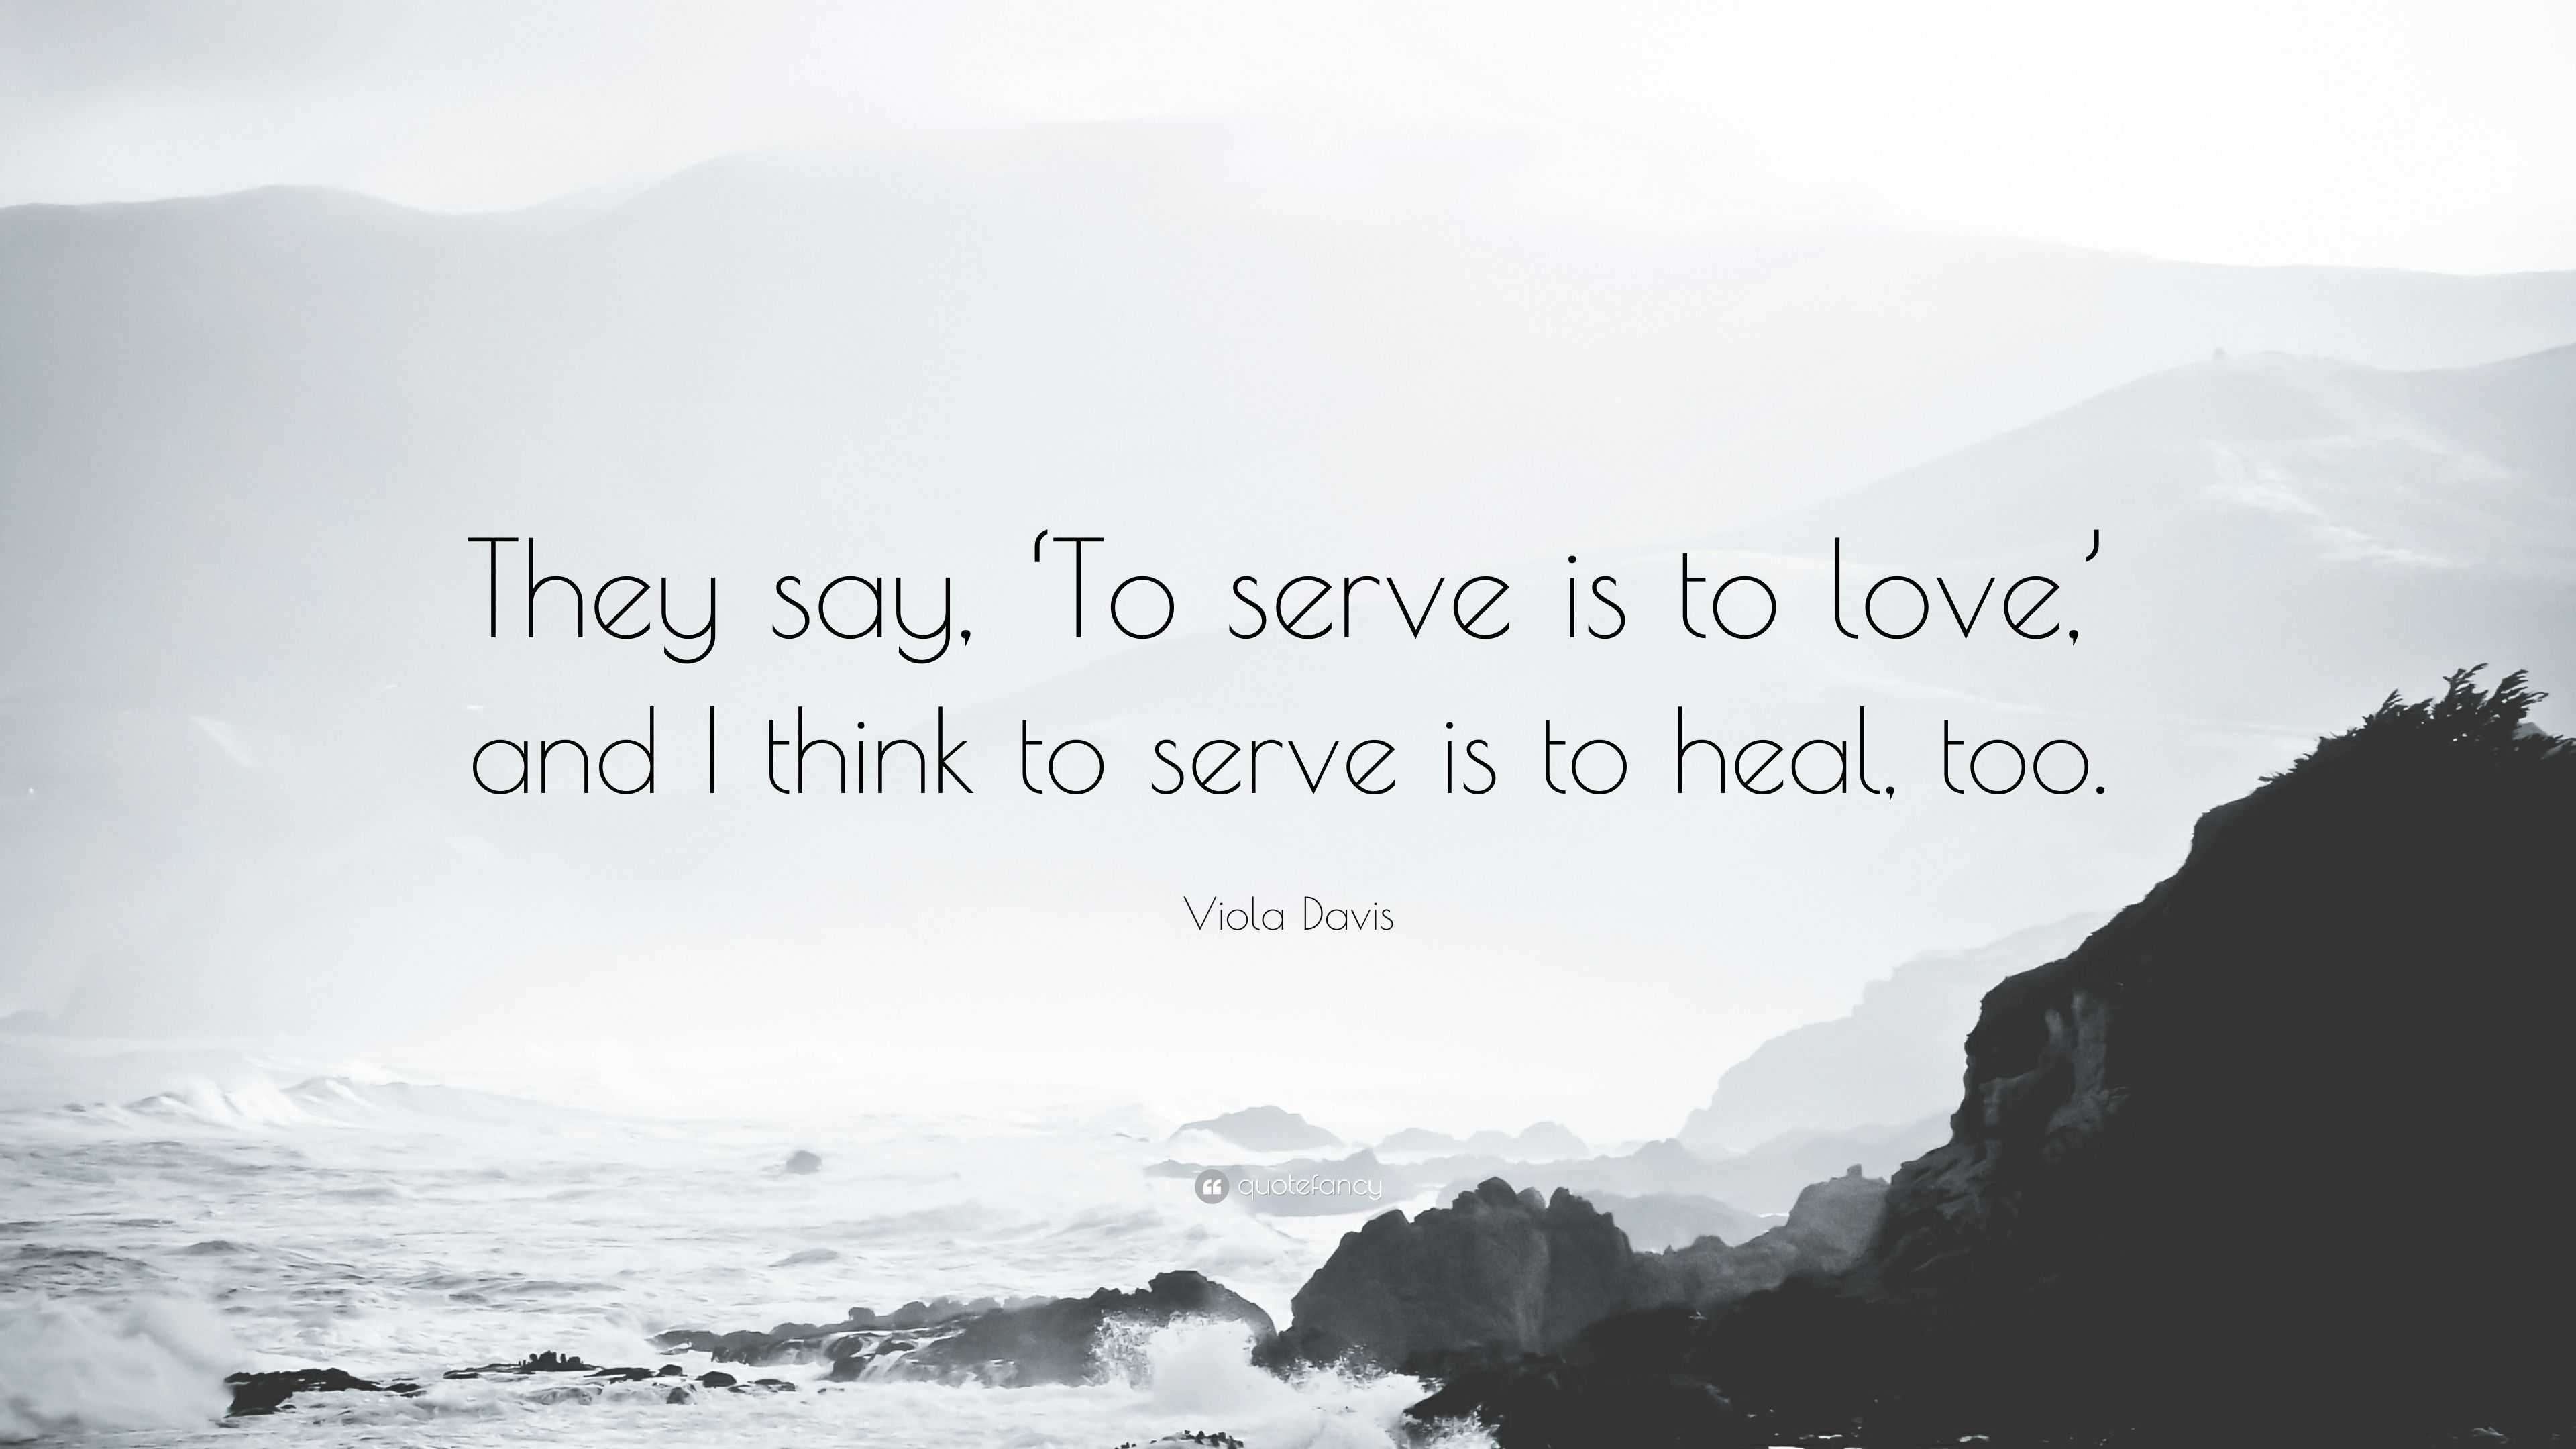 Viola Davis Quote “They say To serve is to love